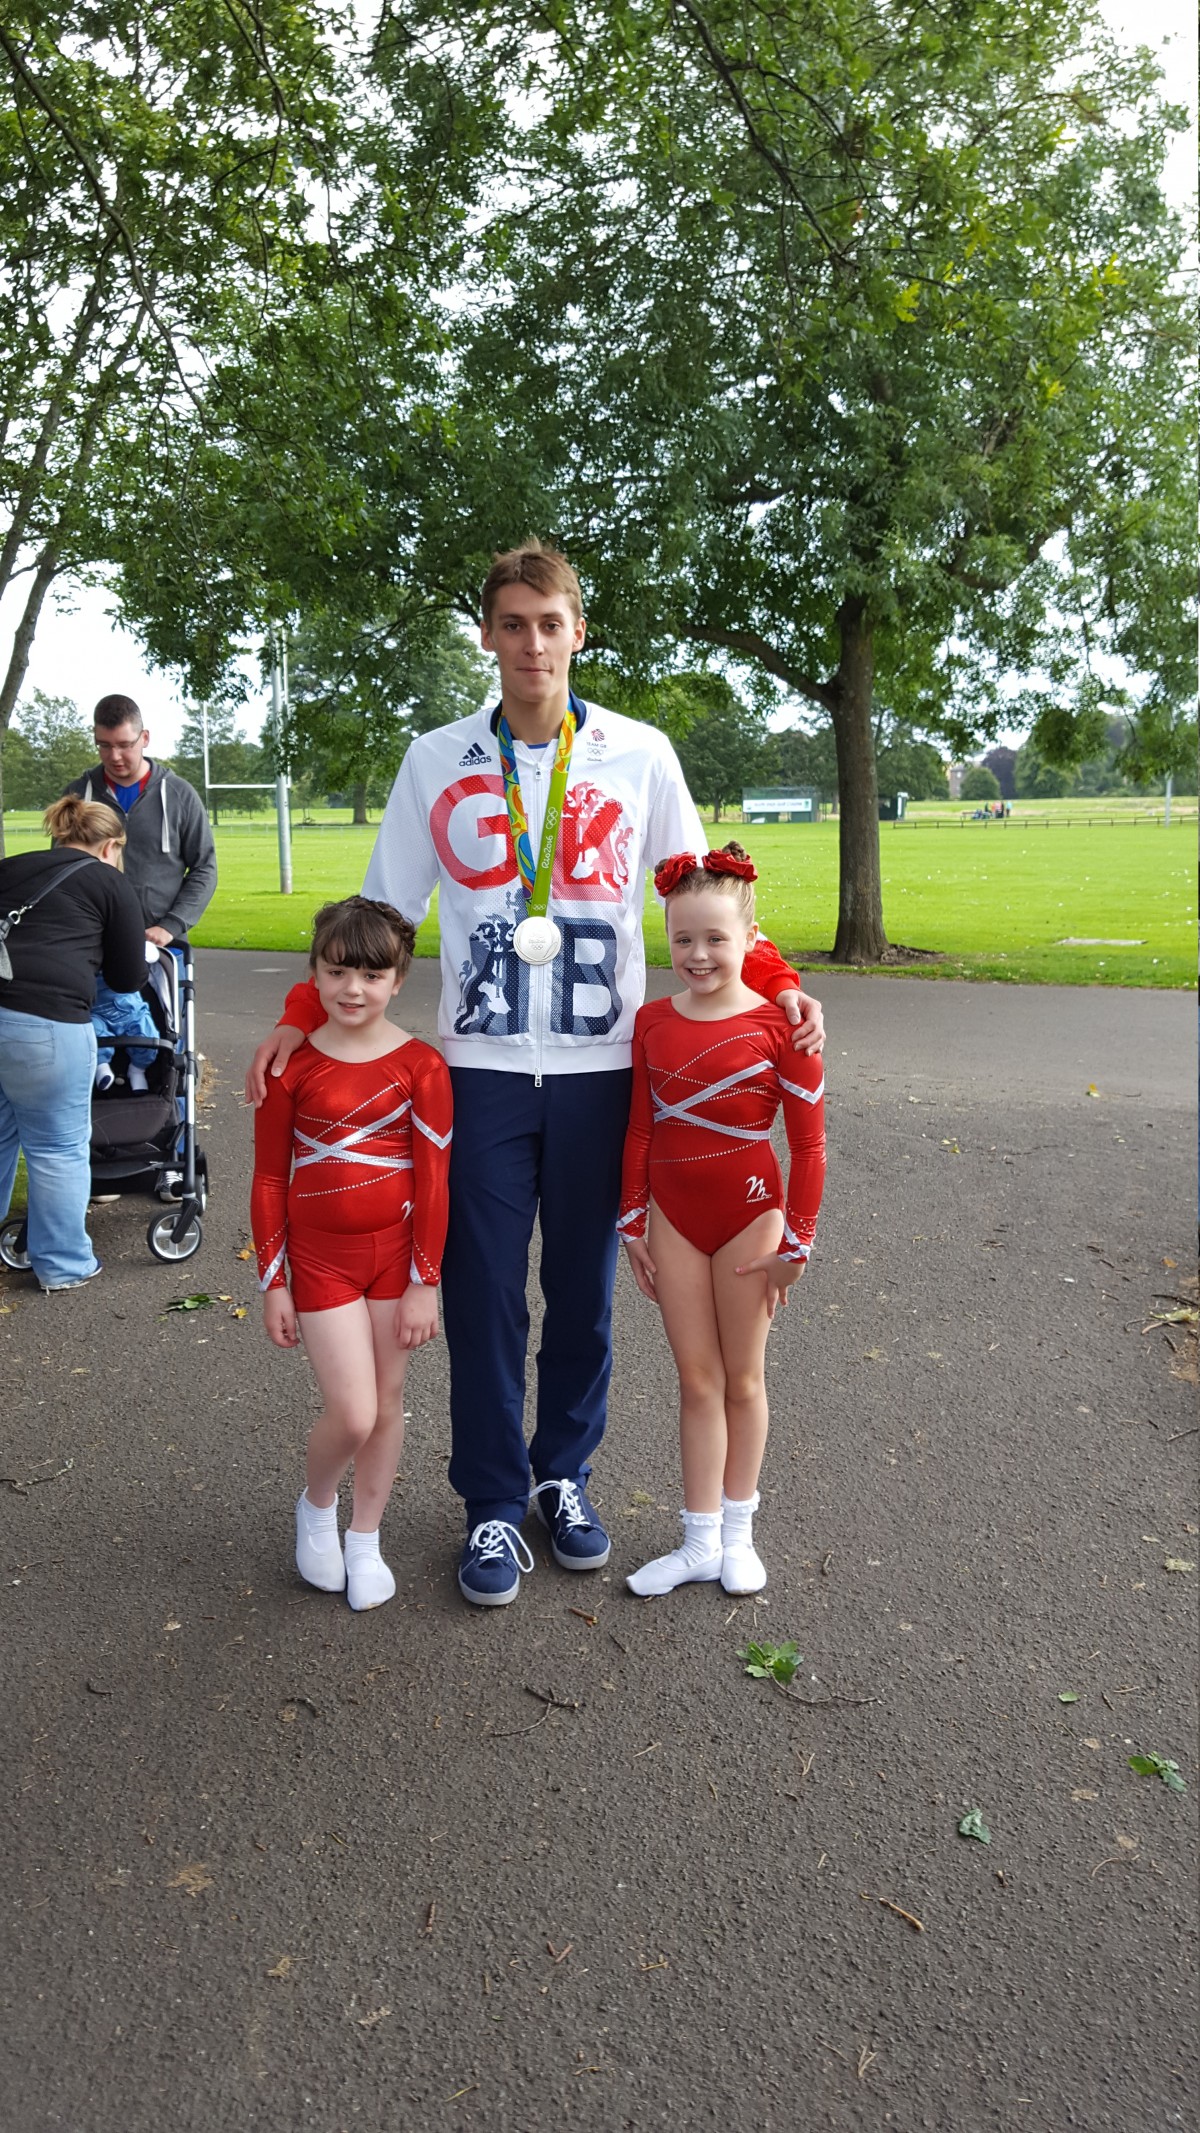 Everyone wanted a picture with Stephen Milne our local Olympic swimming Silver Medalist here in Perth!